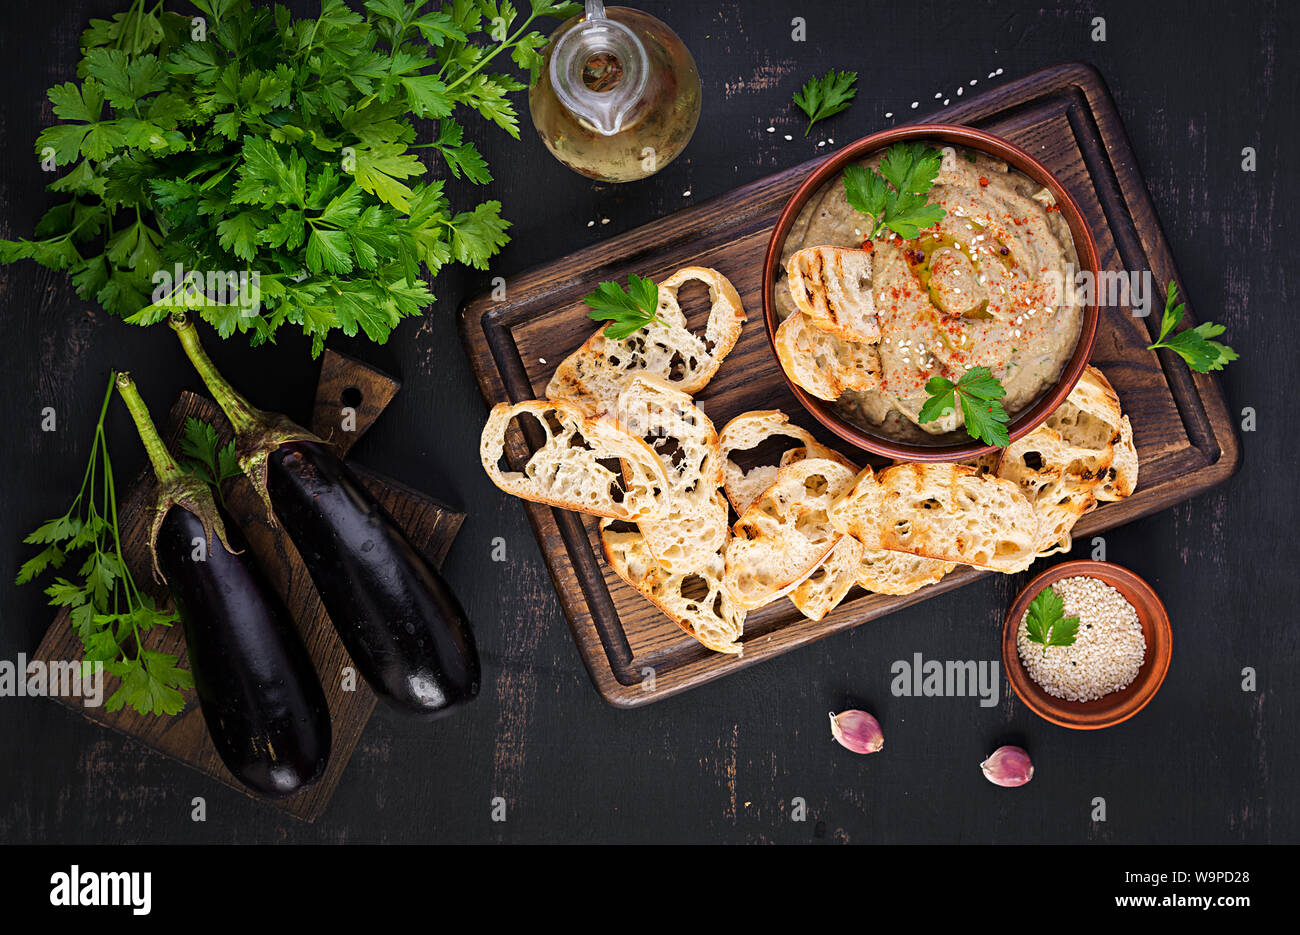 Baba ghanoush vegan hummus from eggplant with seasoning, parsley and toasts. Baba ganoush. Middle Eastern cuisine. Top view, overhead Stock Photo